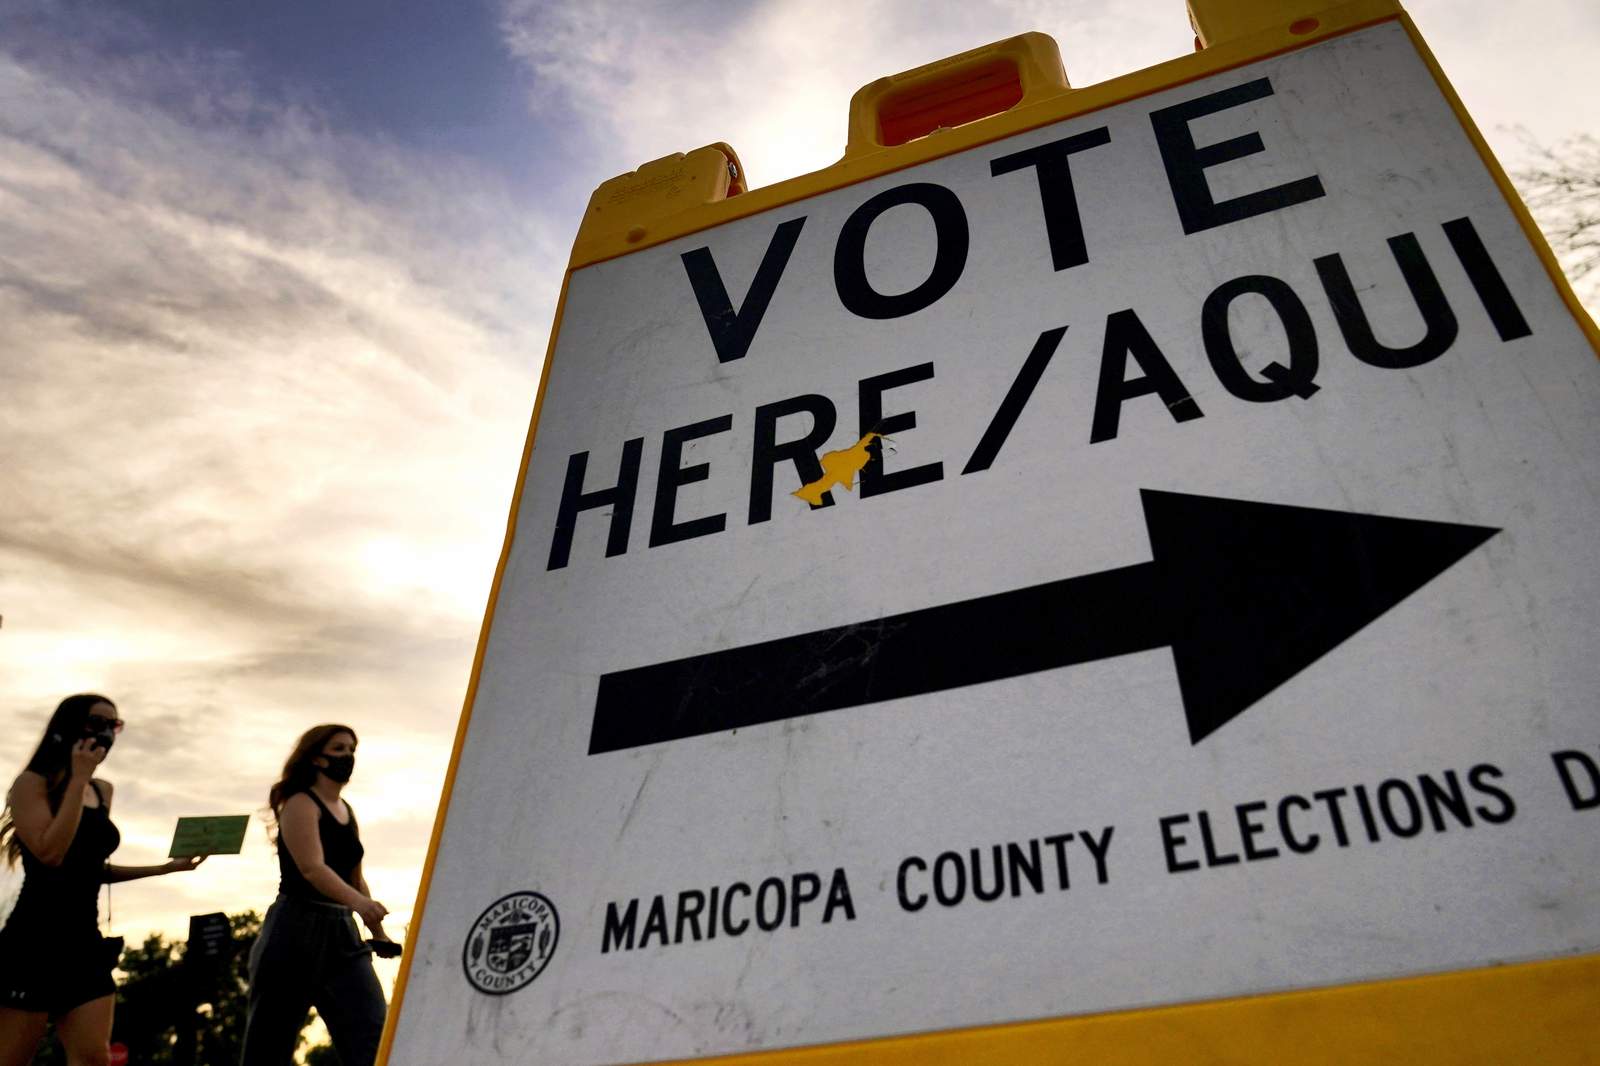 As voting fight moves westward, accusations of racism follow